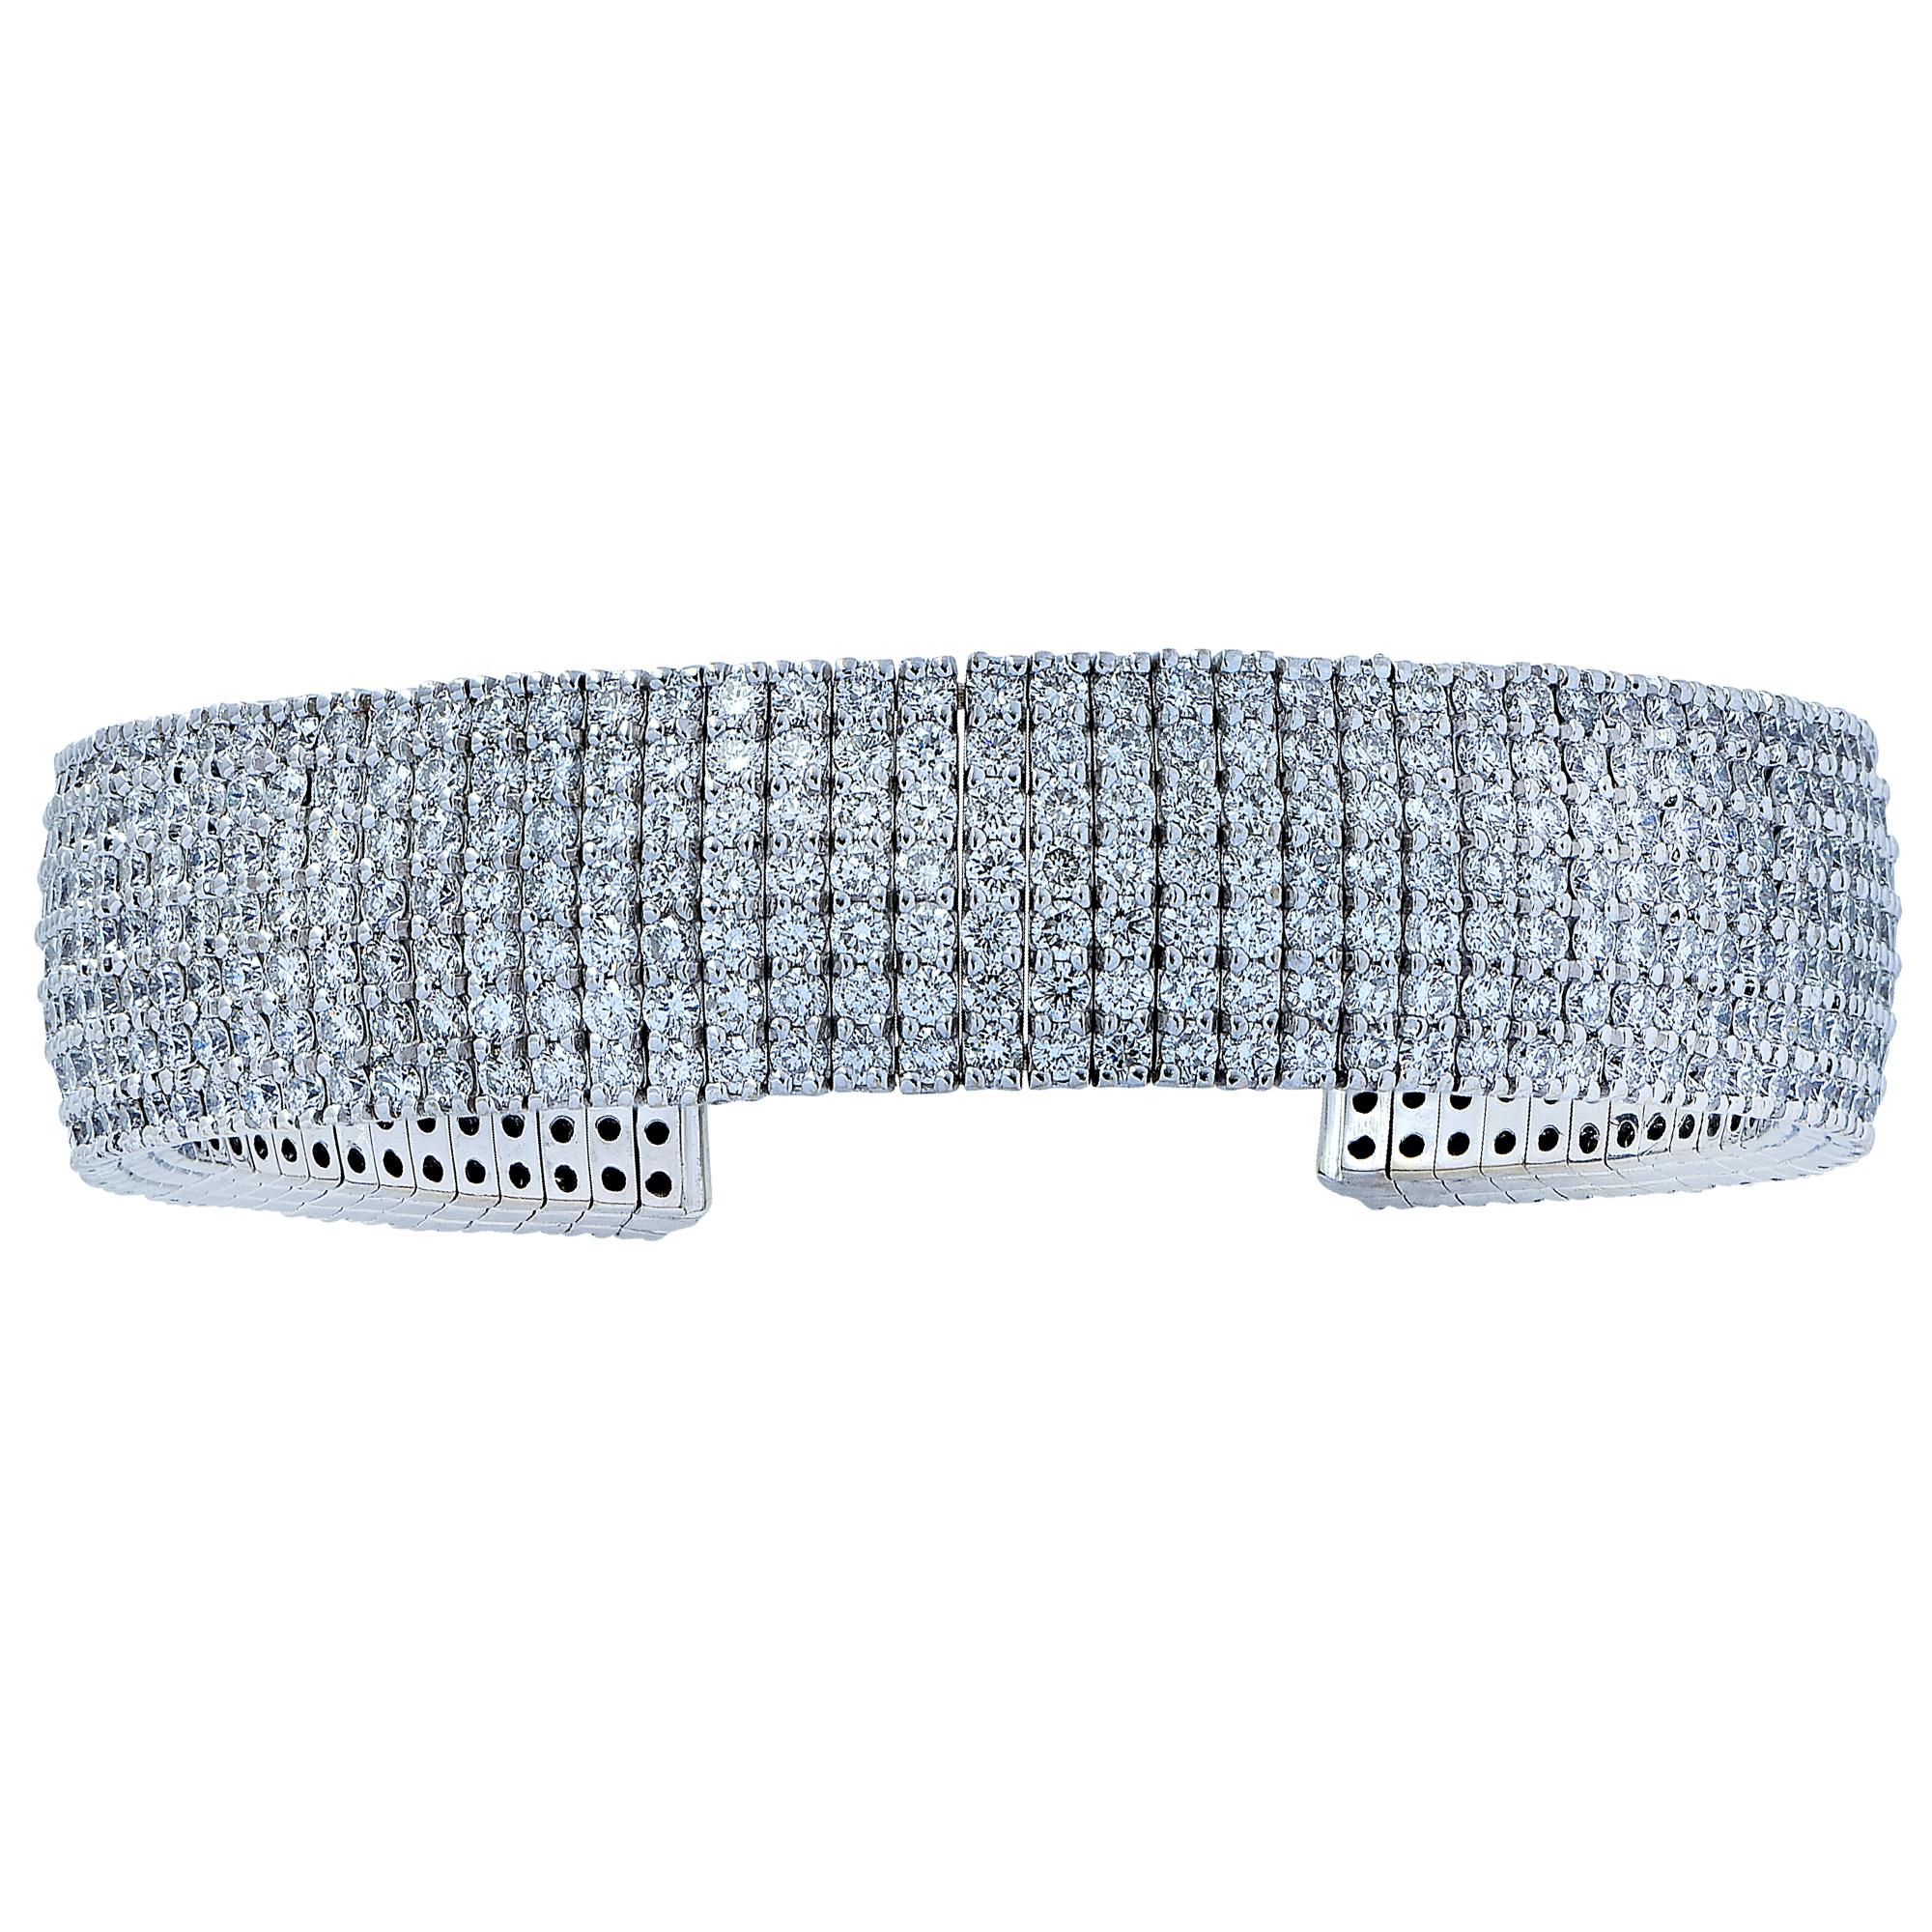 Spectacular diamond cuff bracelet finely crafted in 18 karat white gold featuring 560 round brilliant cut diamonds weighing approximately 13 carats, G-H color, VS clarity. Make an elegant statement with seven rows of dazzling diamonds wrapped around